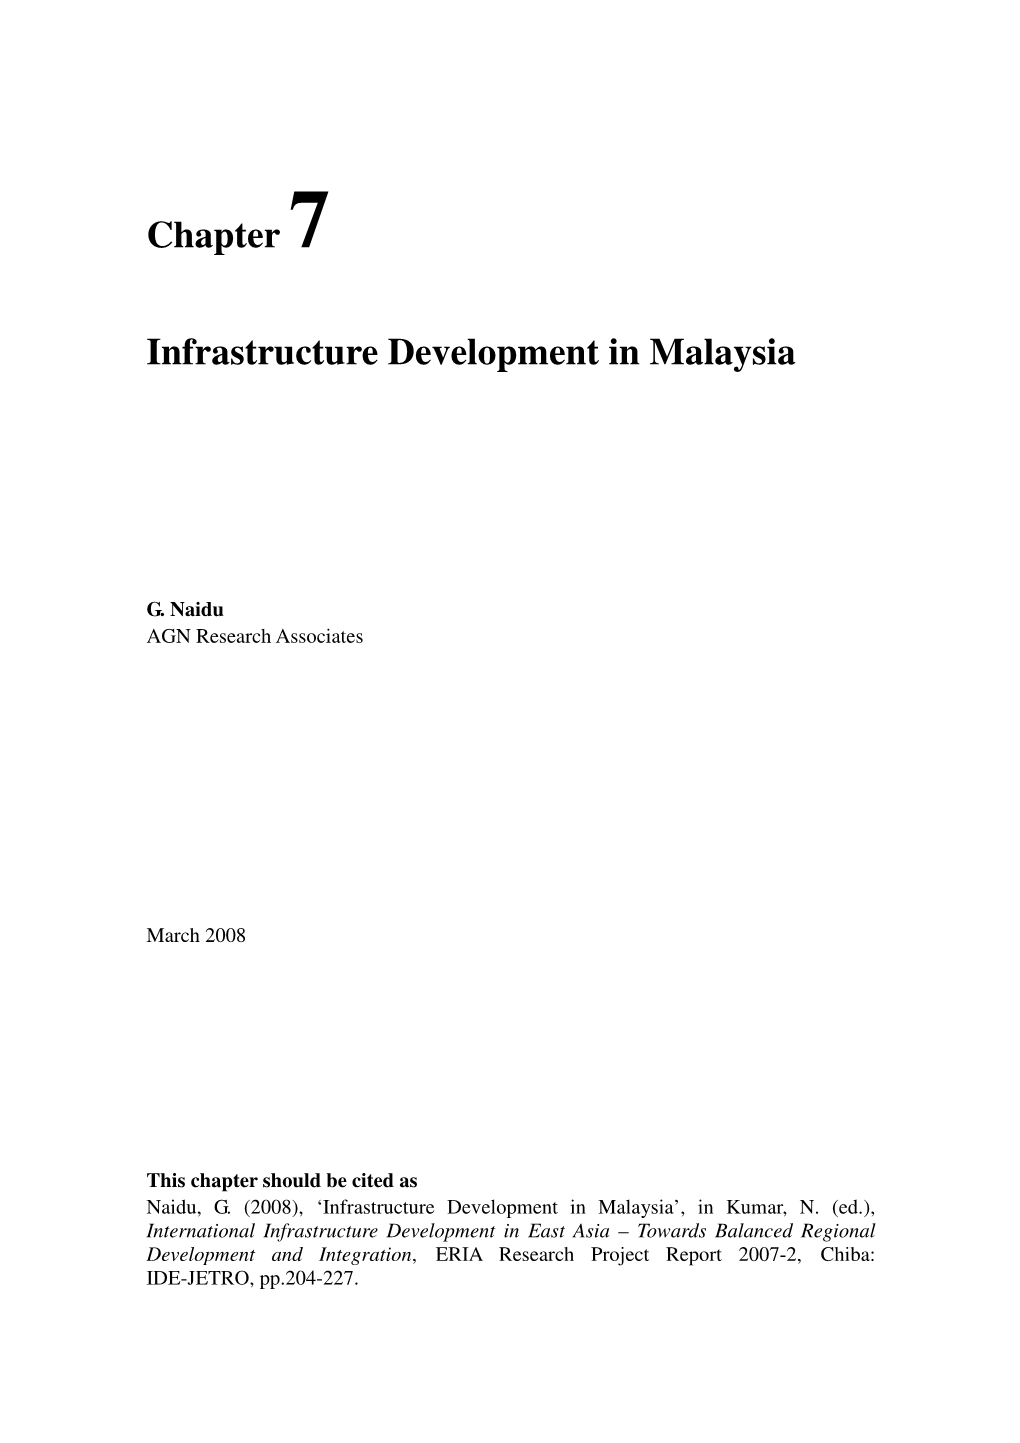 Chapter 7 Infrastructure Development in Malaysia